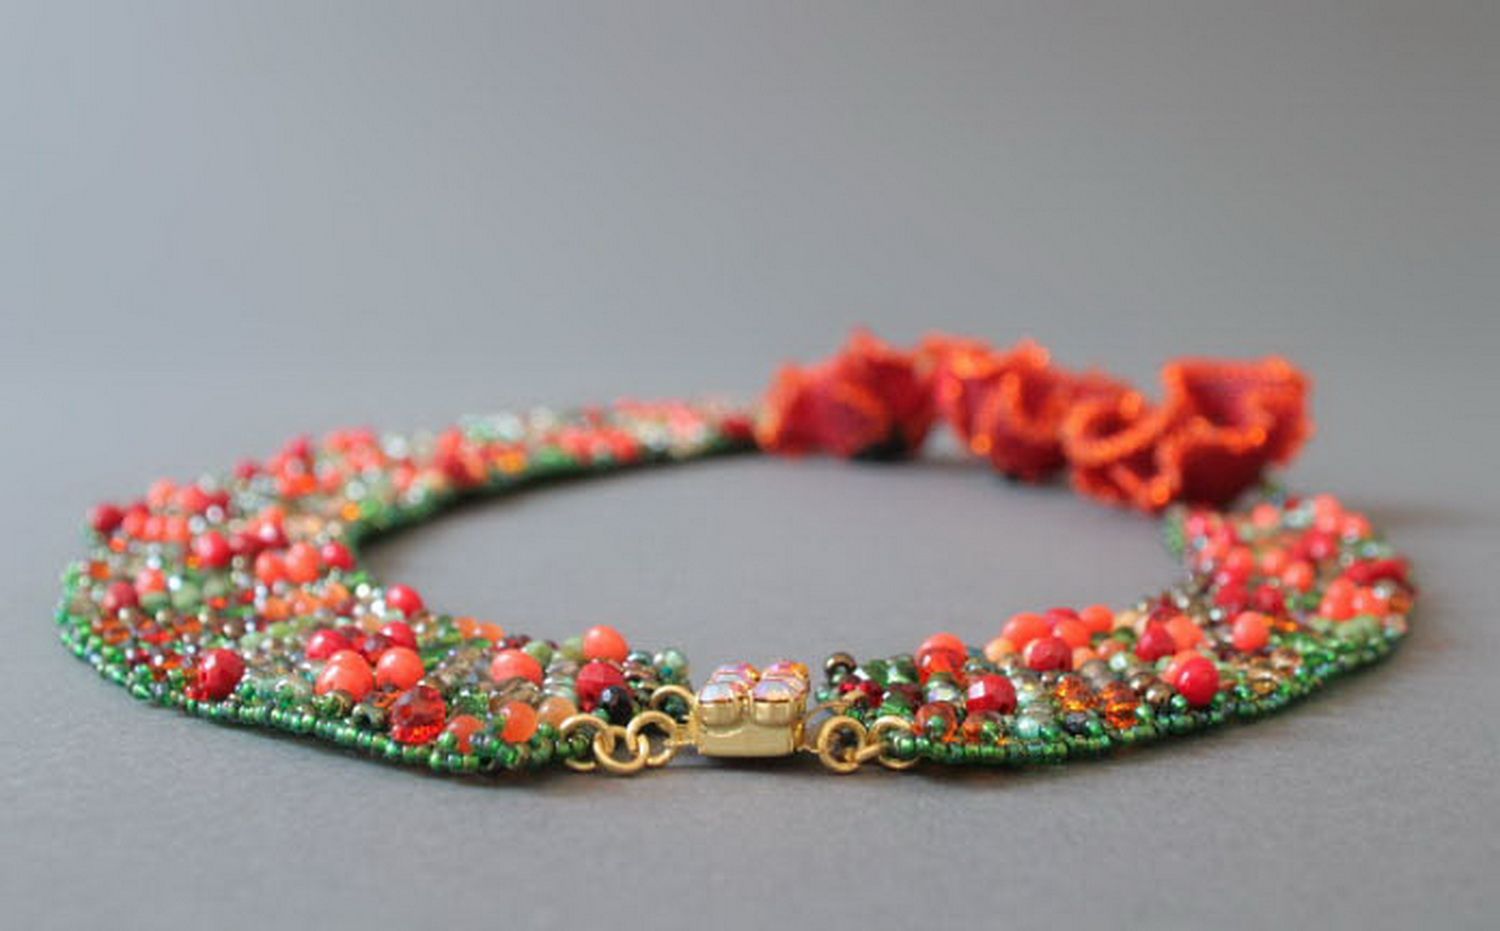 Necklace made from Czech beads with decorative stones photo 8